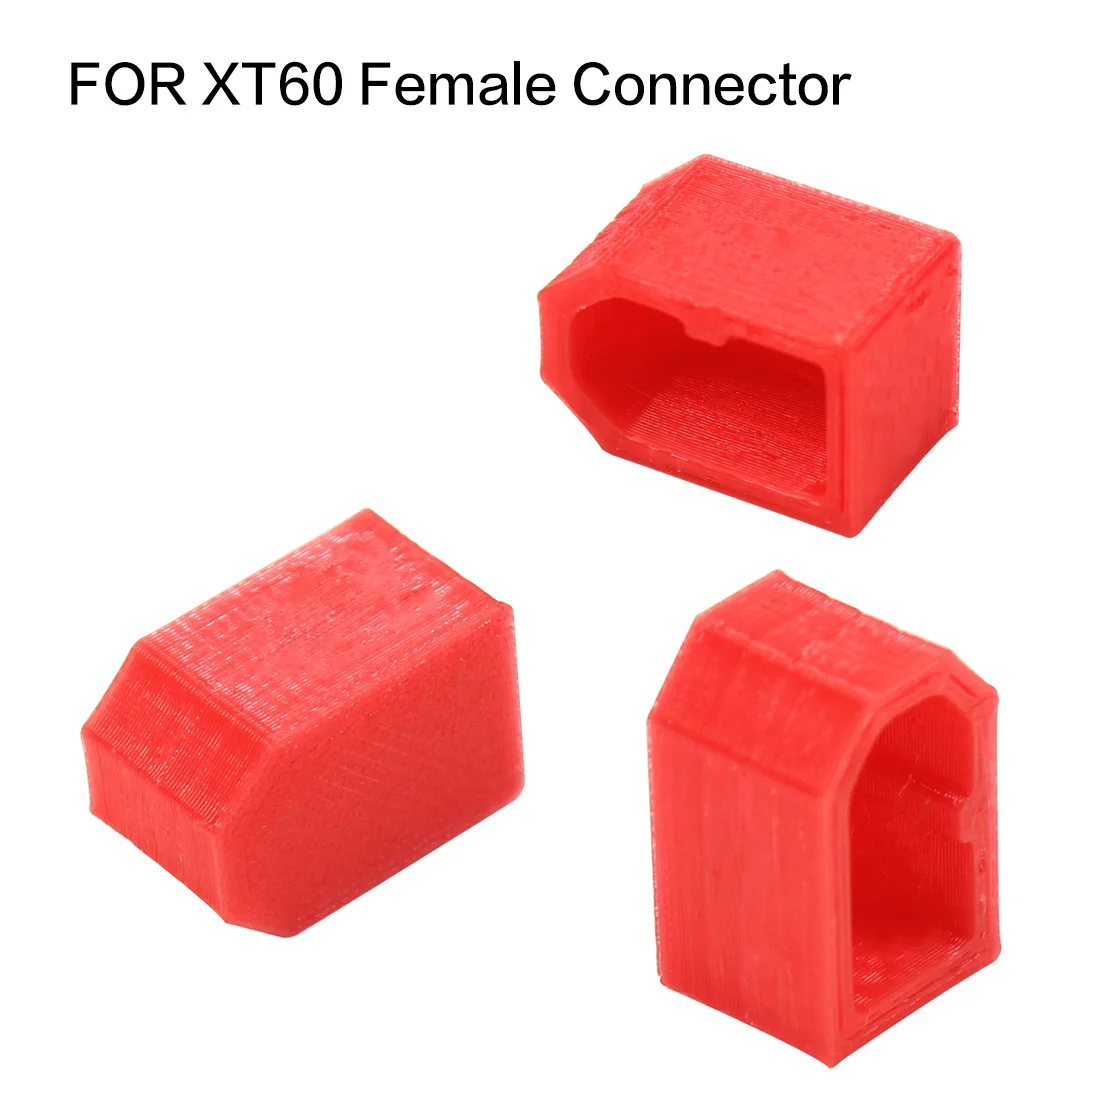 HONG YI-HAT 3D Printed TPU Male Female Protection Shell Housing Case Plug Protector Cap Cover For AMASS XT60 XT90 Plug DIY FPV Drone Drone Spare Parts Color : TPU XT60 Plug Cap 